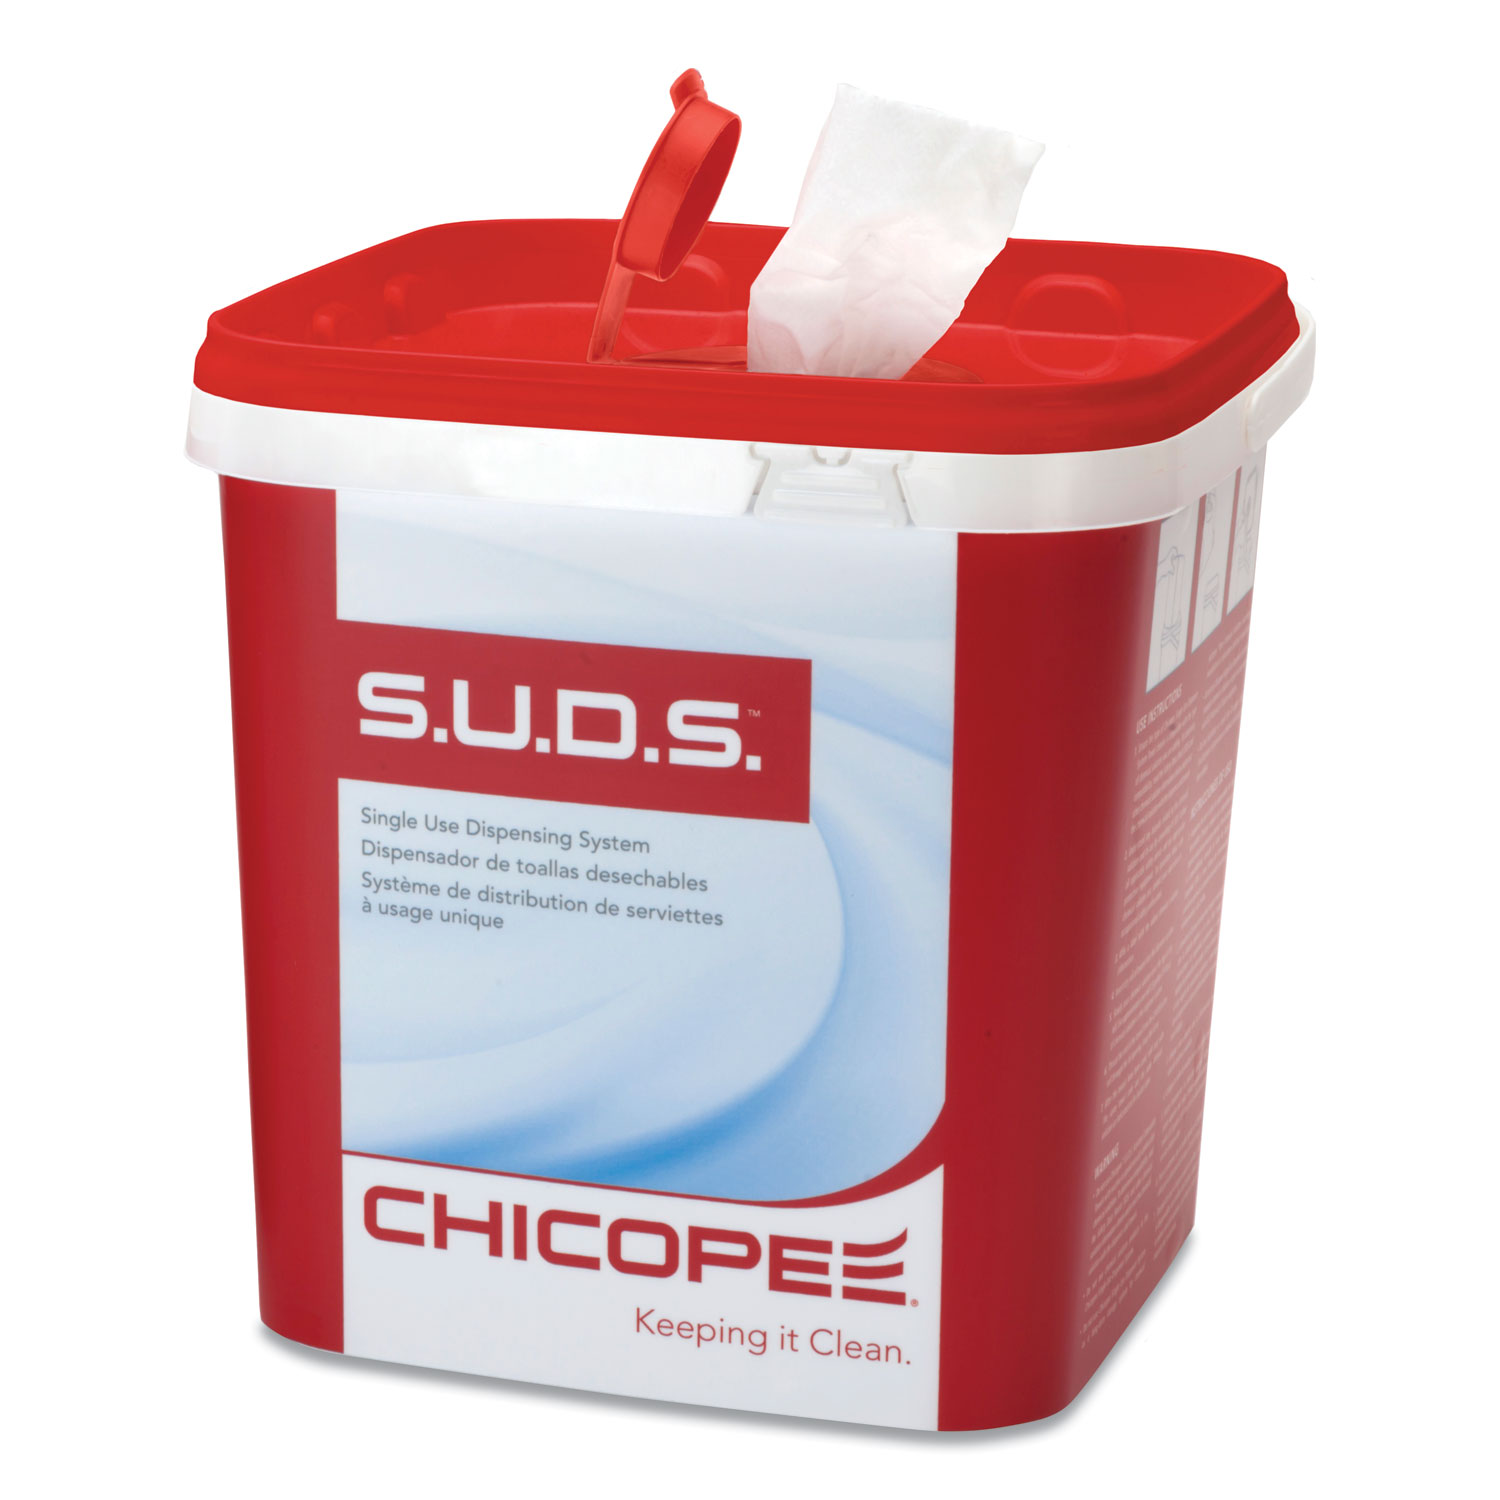  Chicopee 0727 S.U.D.S Bucket with Lid, 7.5 x 7.5 x 8, Red/White, 6/Carton (CHI0727) 